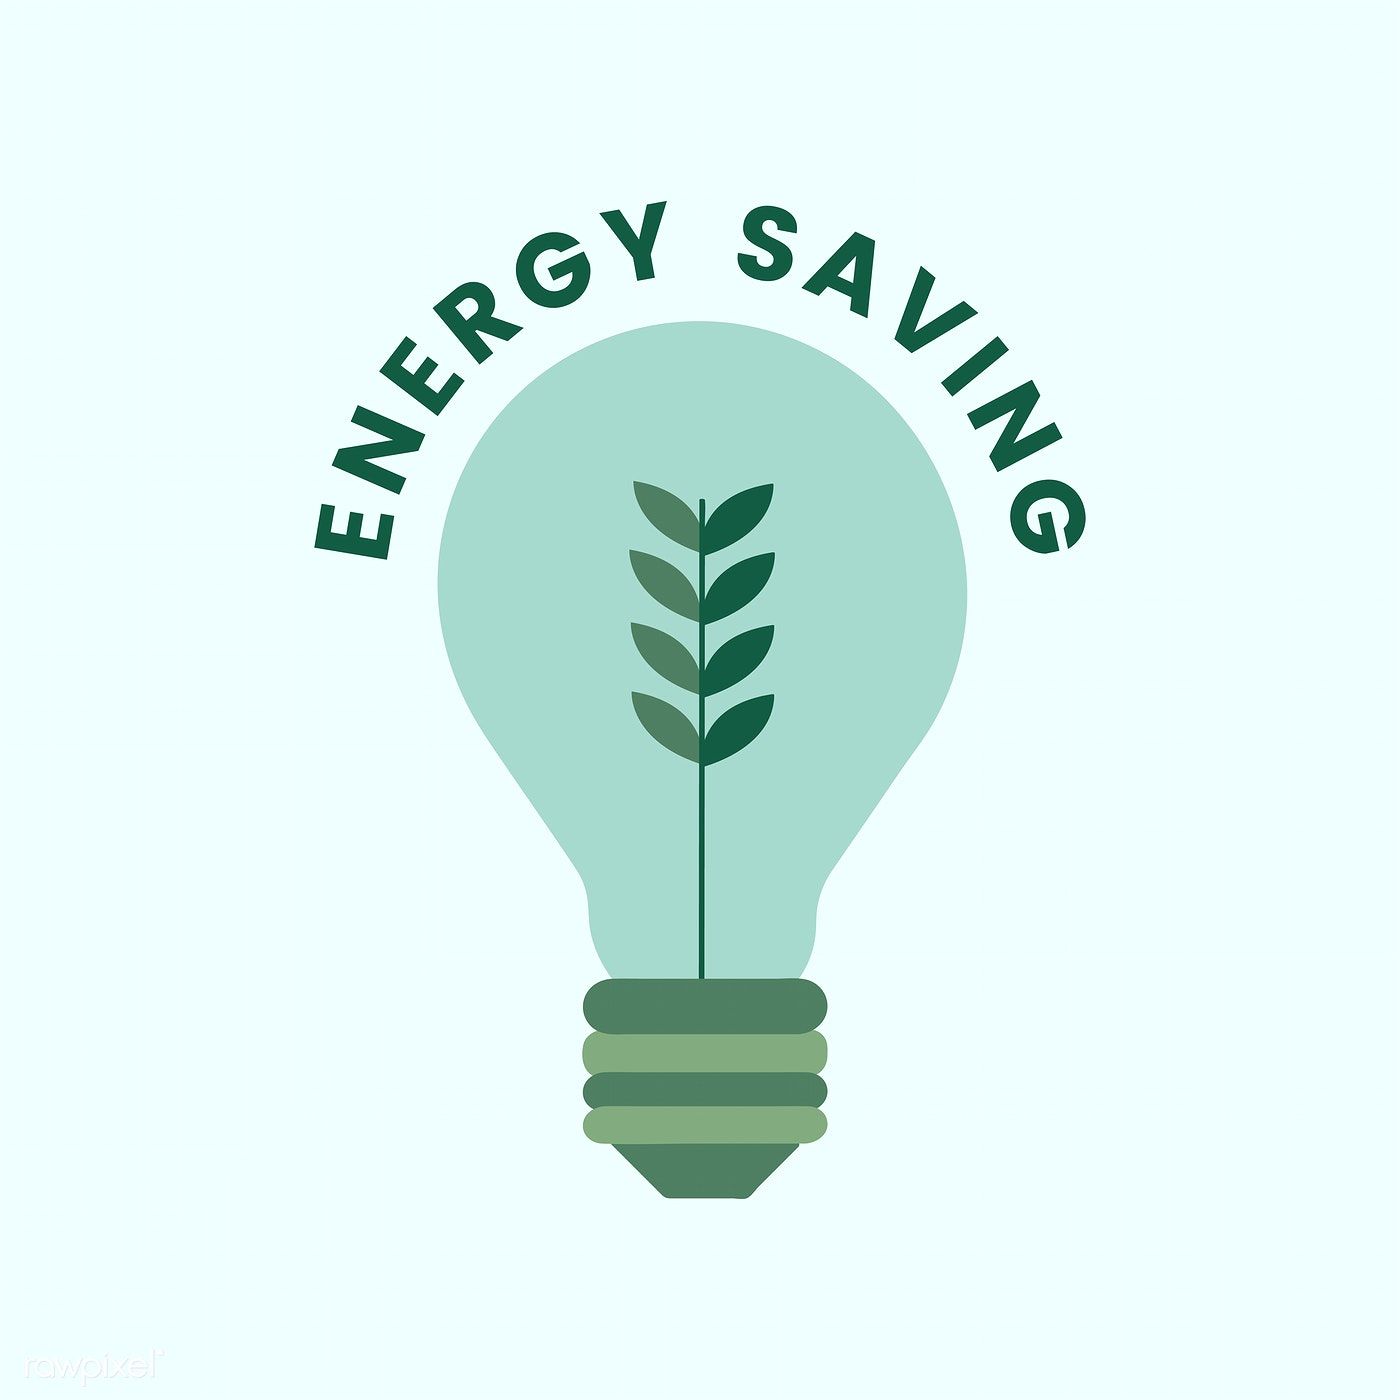 Let's Save Energy' Packs - Rainy Day Trust